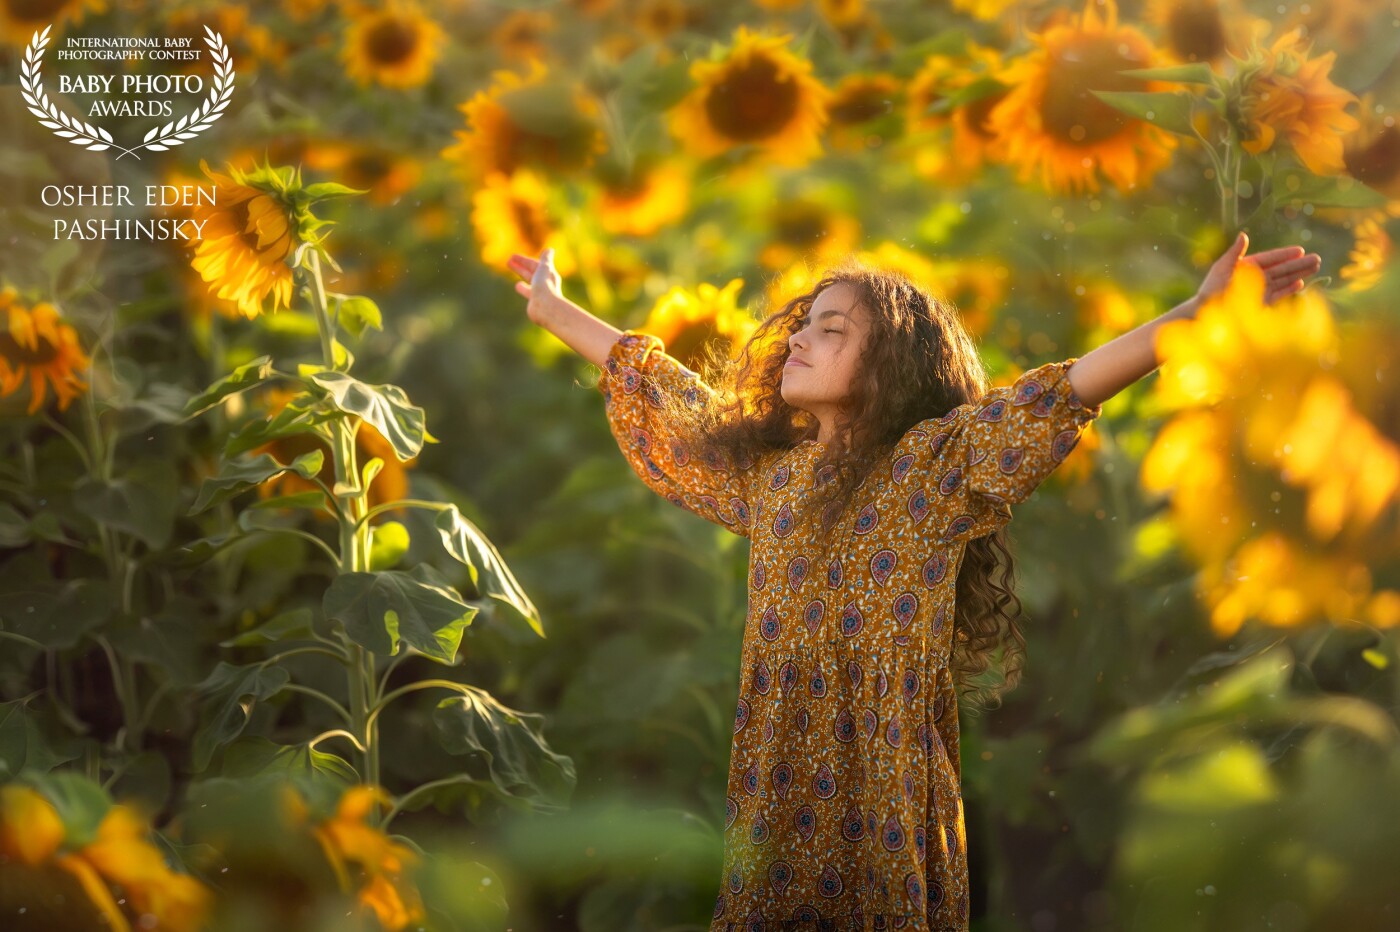 Now in Israel, this is the sunflower season. The entire field is yellow and glows like the sun, which is a good reason to go for a walk and enjoy all that good nature has to offer us. In this photo, I captured a special moment of happiness of a girl celebrating her birthday in the field. Yuval, happy birthday. <br />
